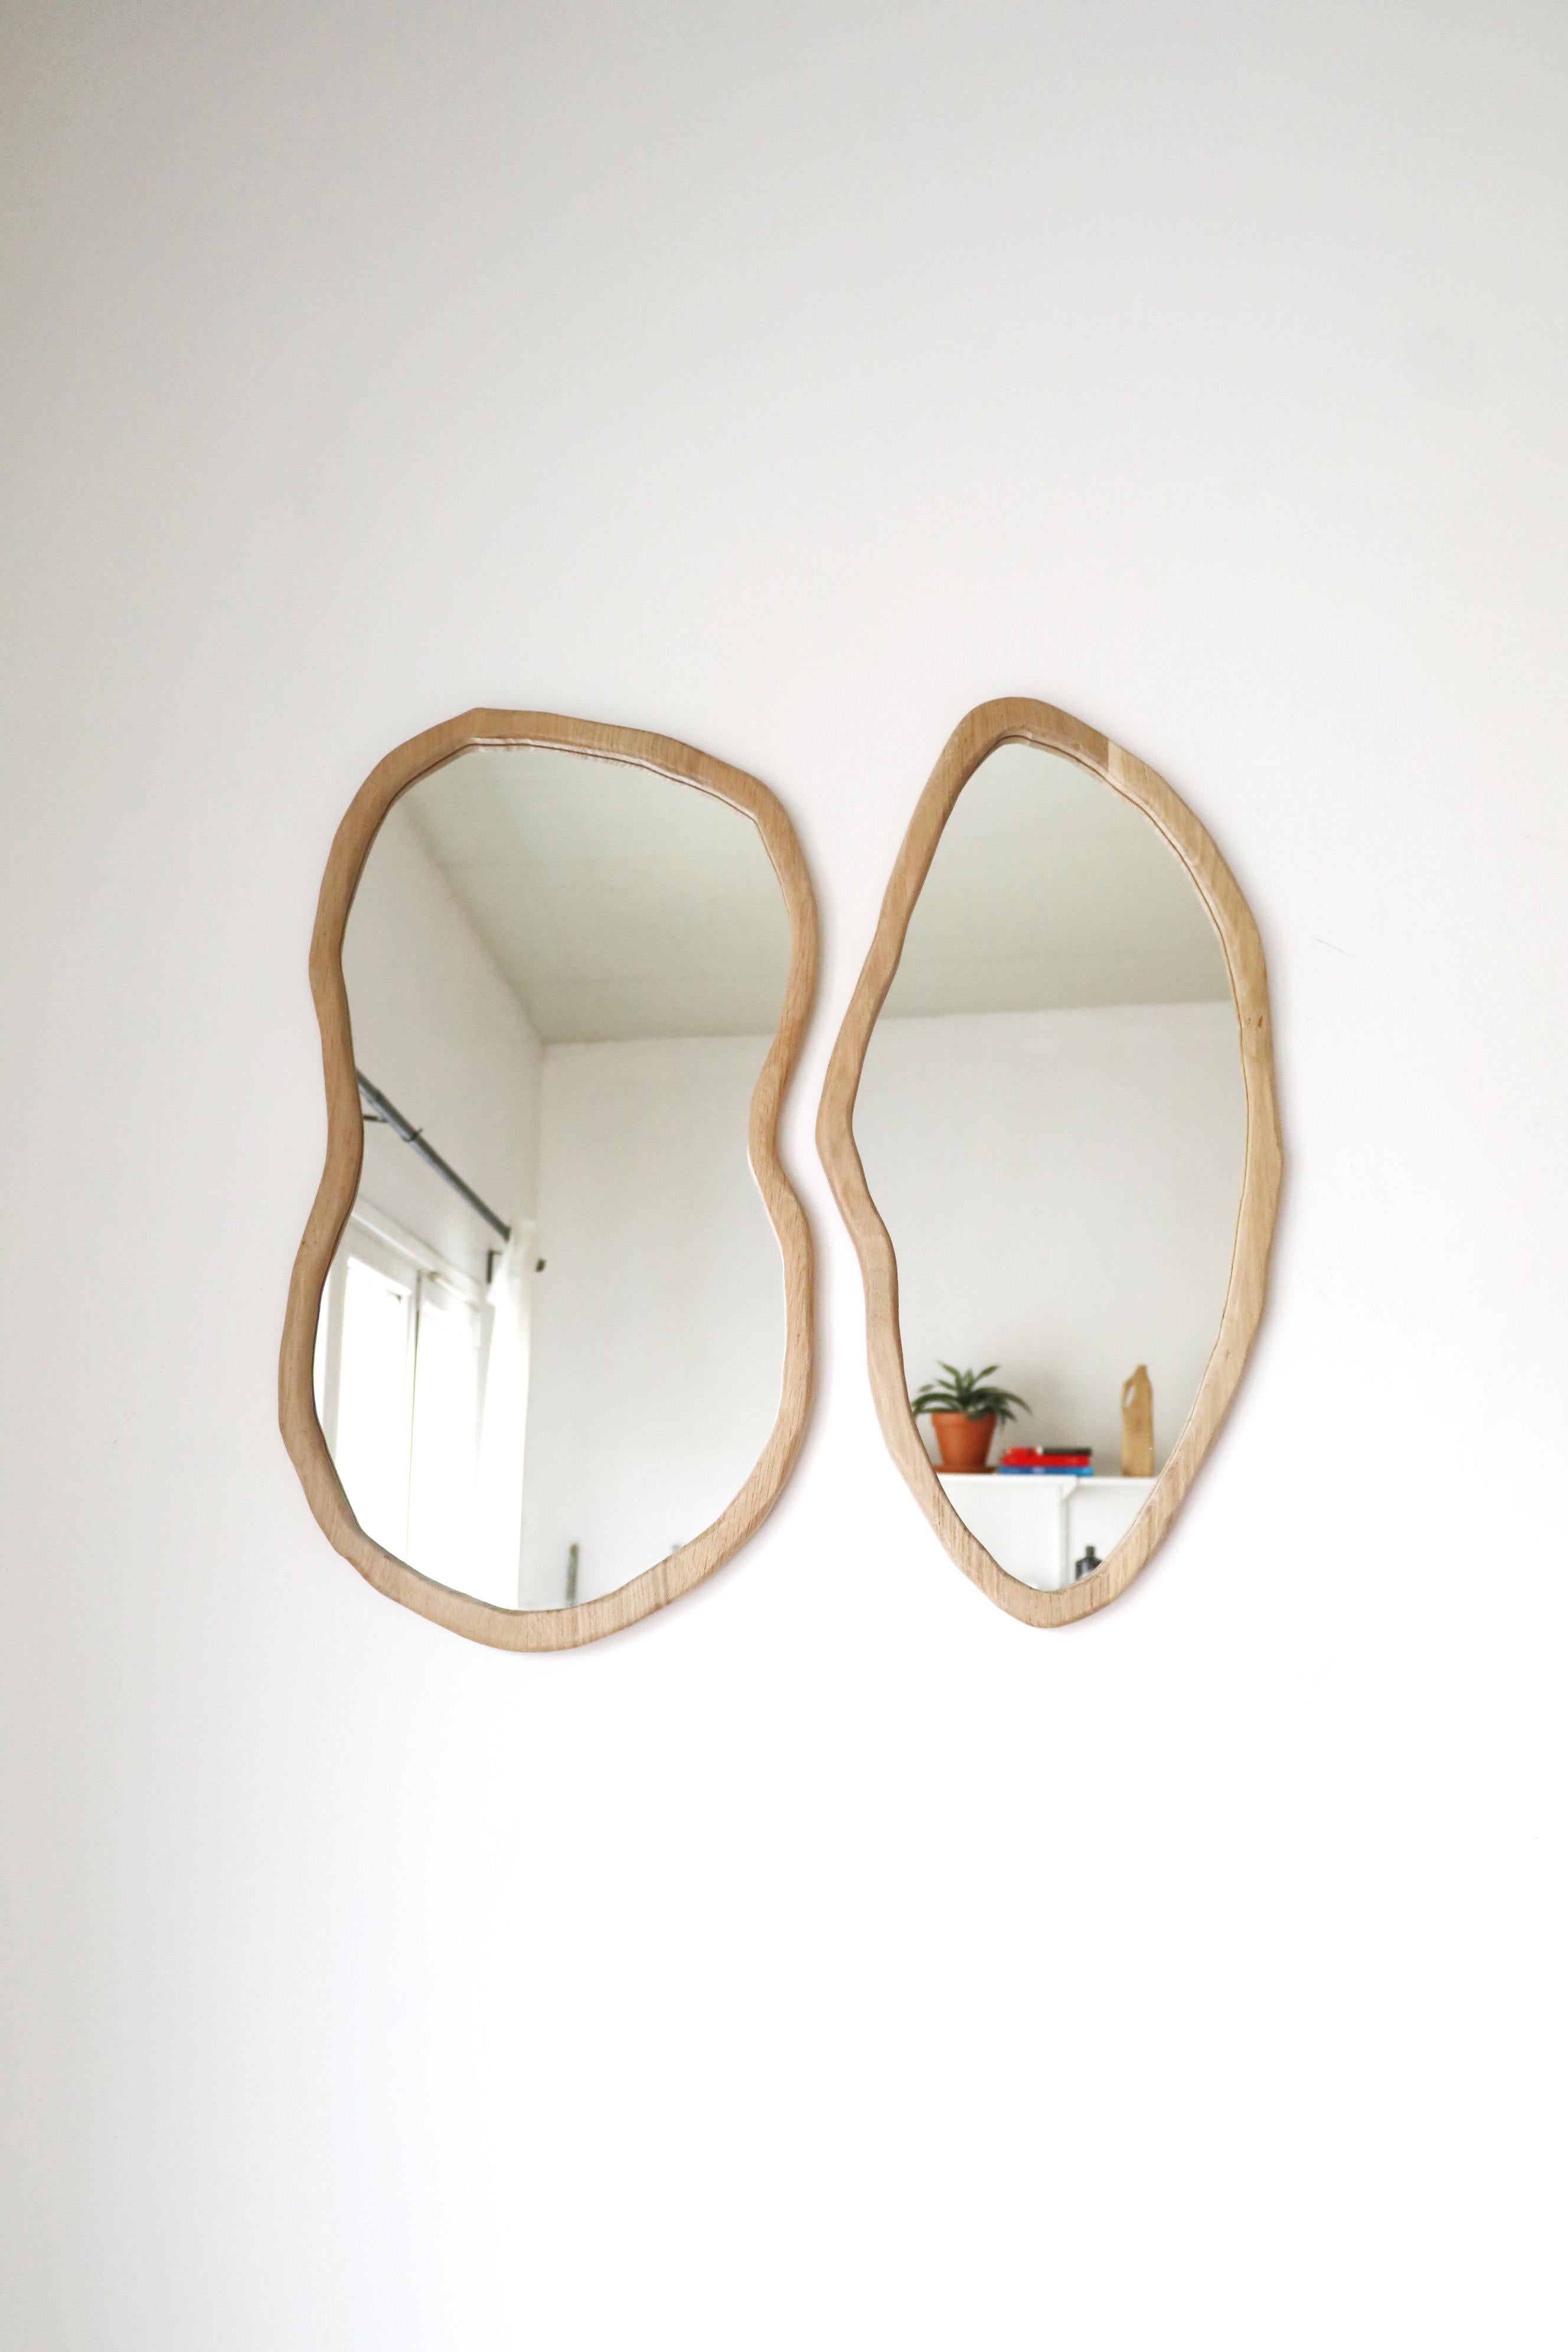 Set of 2 Rencontre Large Mirrors by Alice Lahana Studio For Sale 3